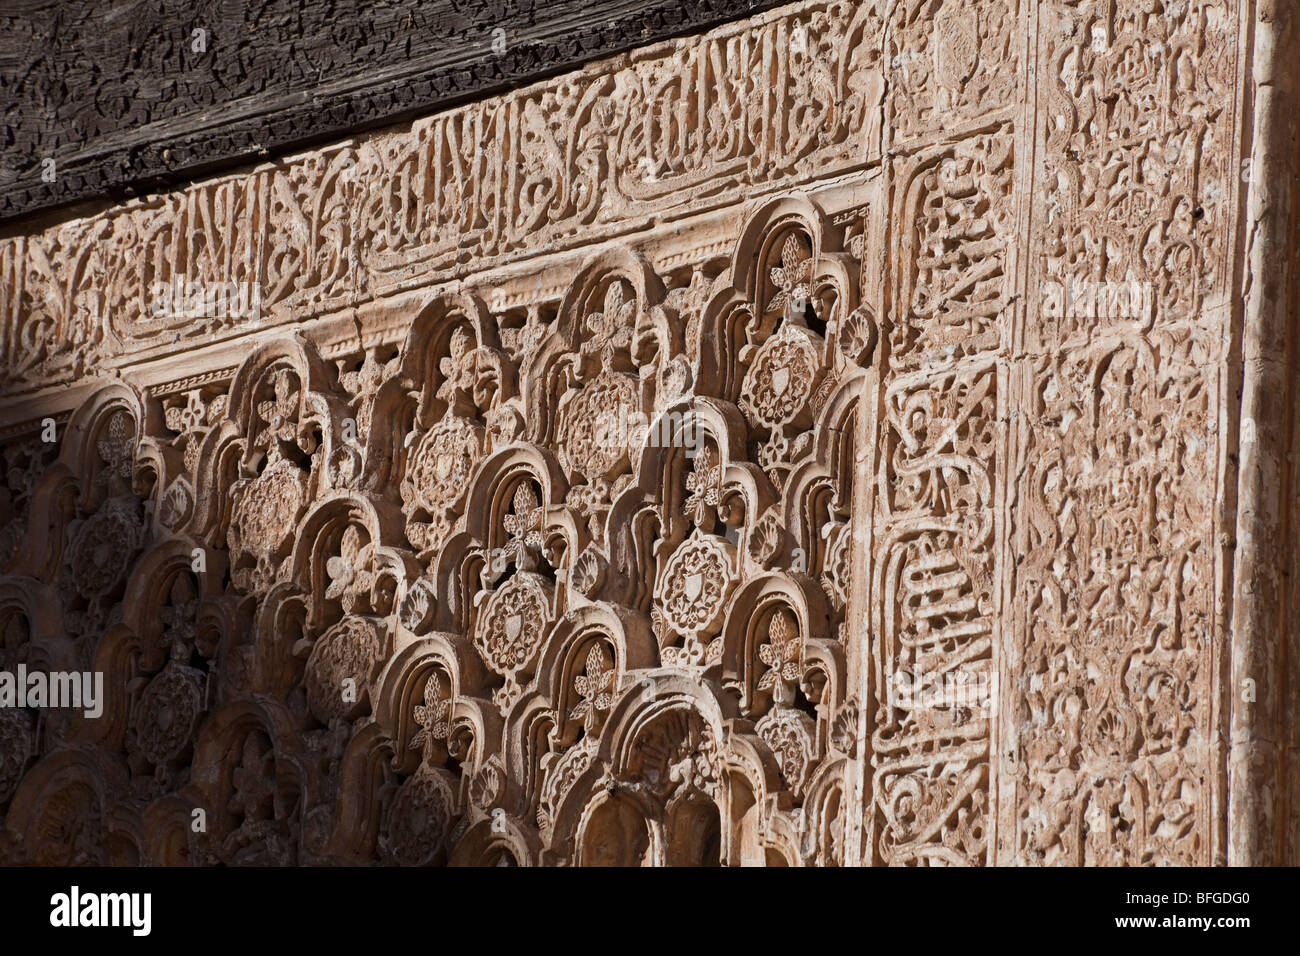 courtyard facade with decorated stucco, Court of the Lions, Alhambra, Granada, Spain Stock Photo